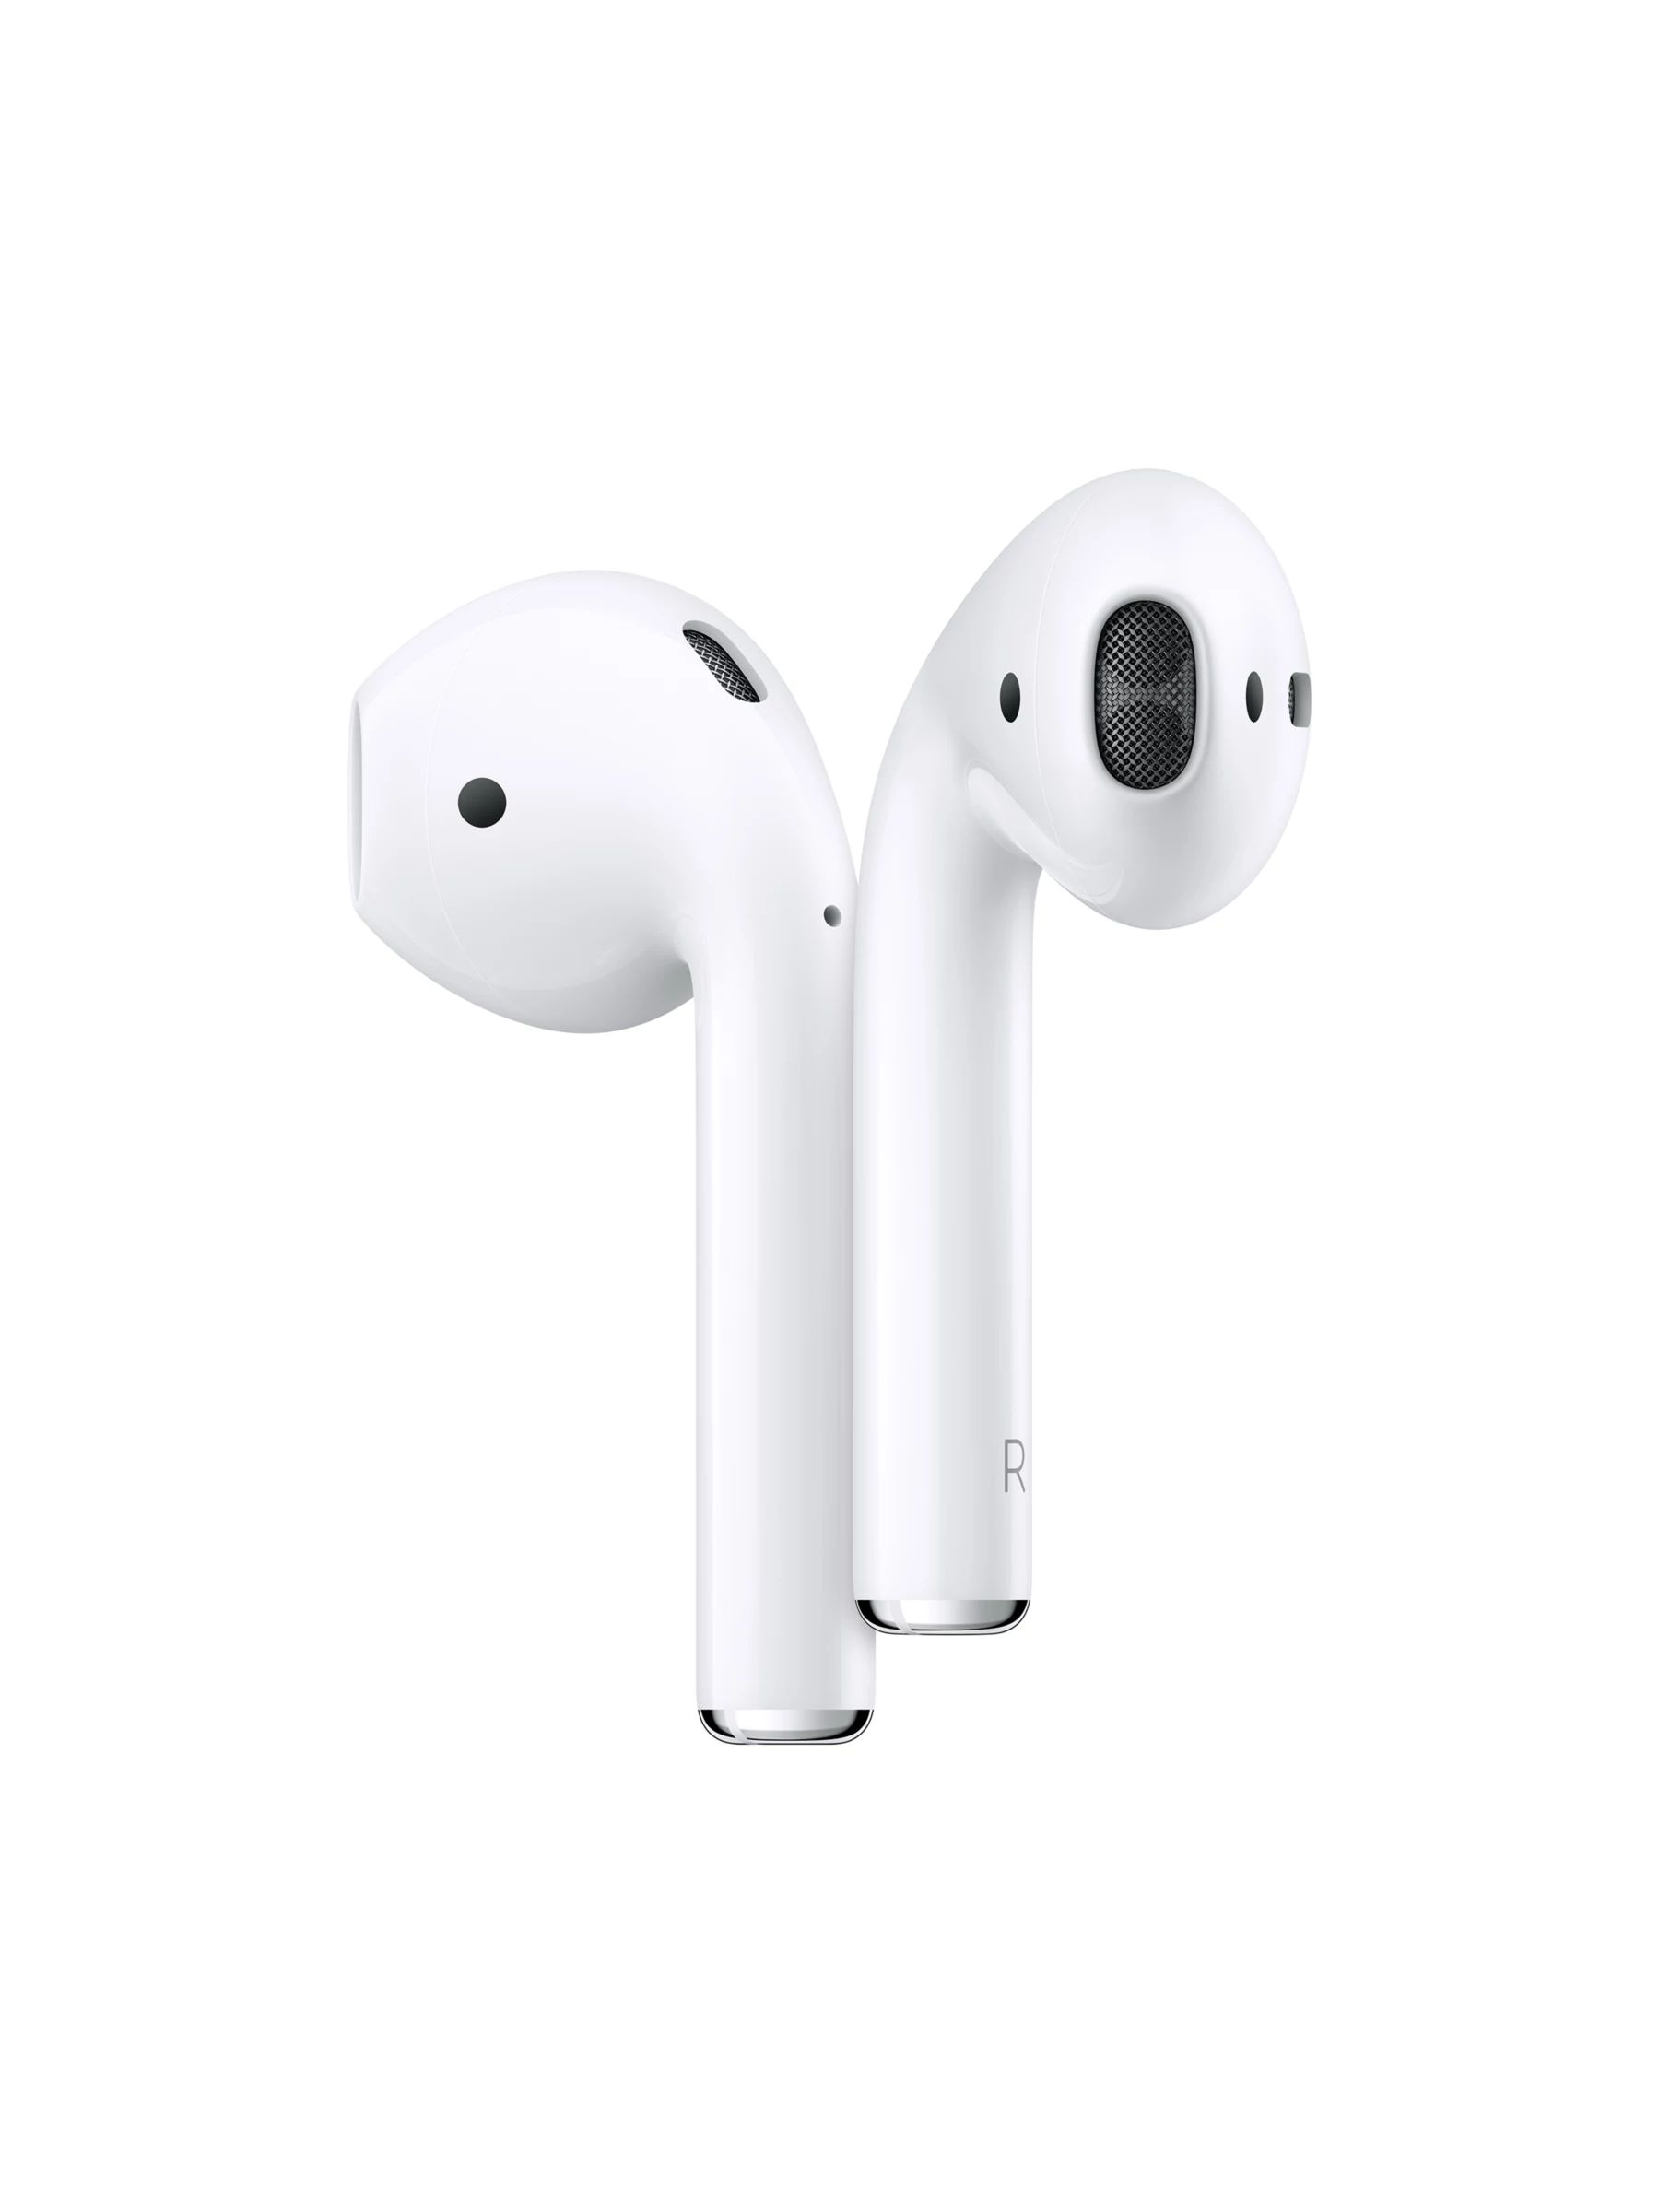 2019 Apple AirPods with Charging Case (2nd Generation) | John Lewis (UK)